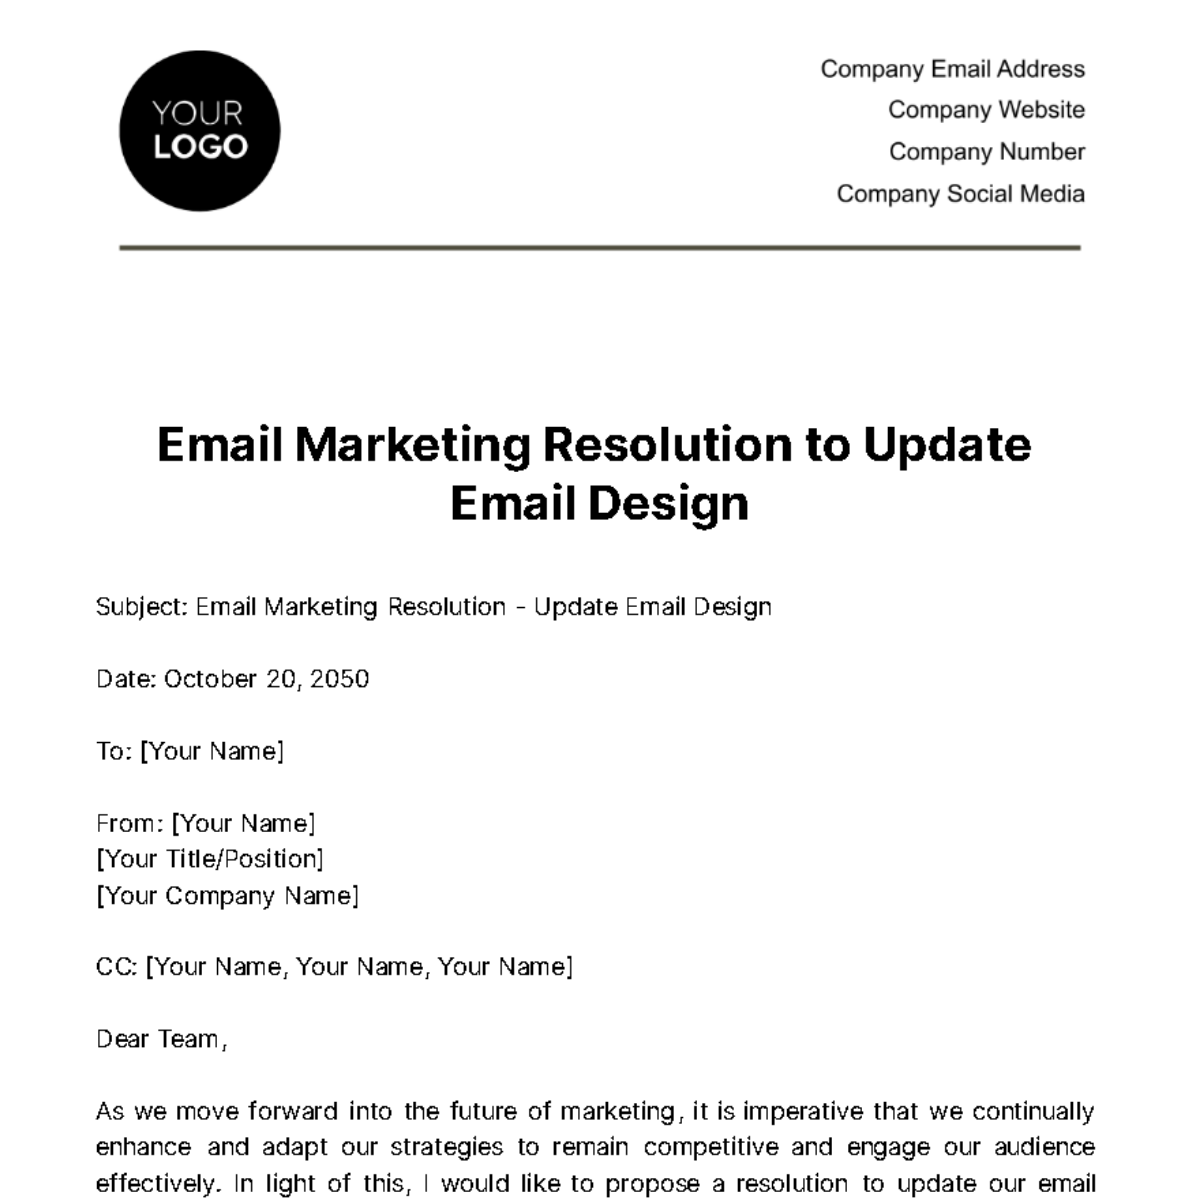 Free Email Marketing Resolution to Update Email Design Template